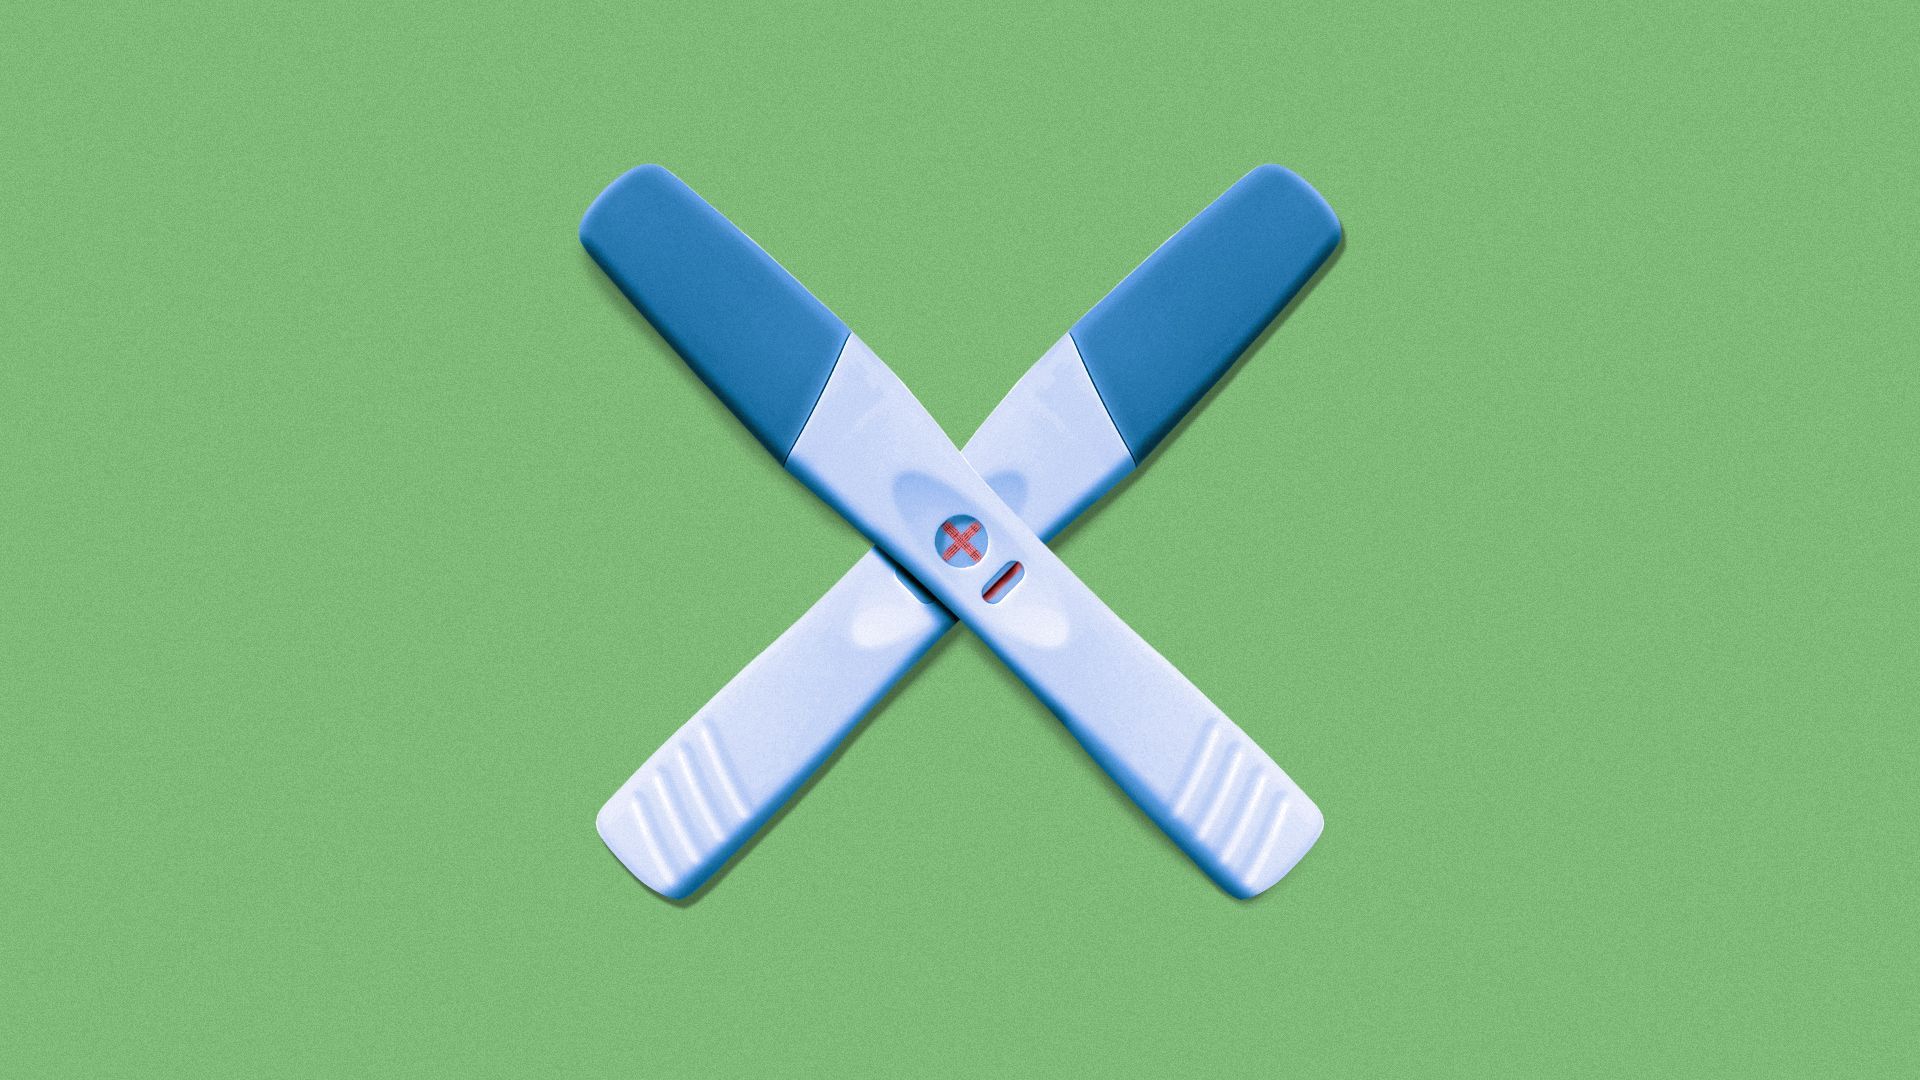 Illustration of two pregnancy tests forming an "X".